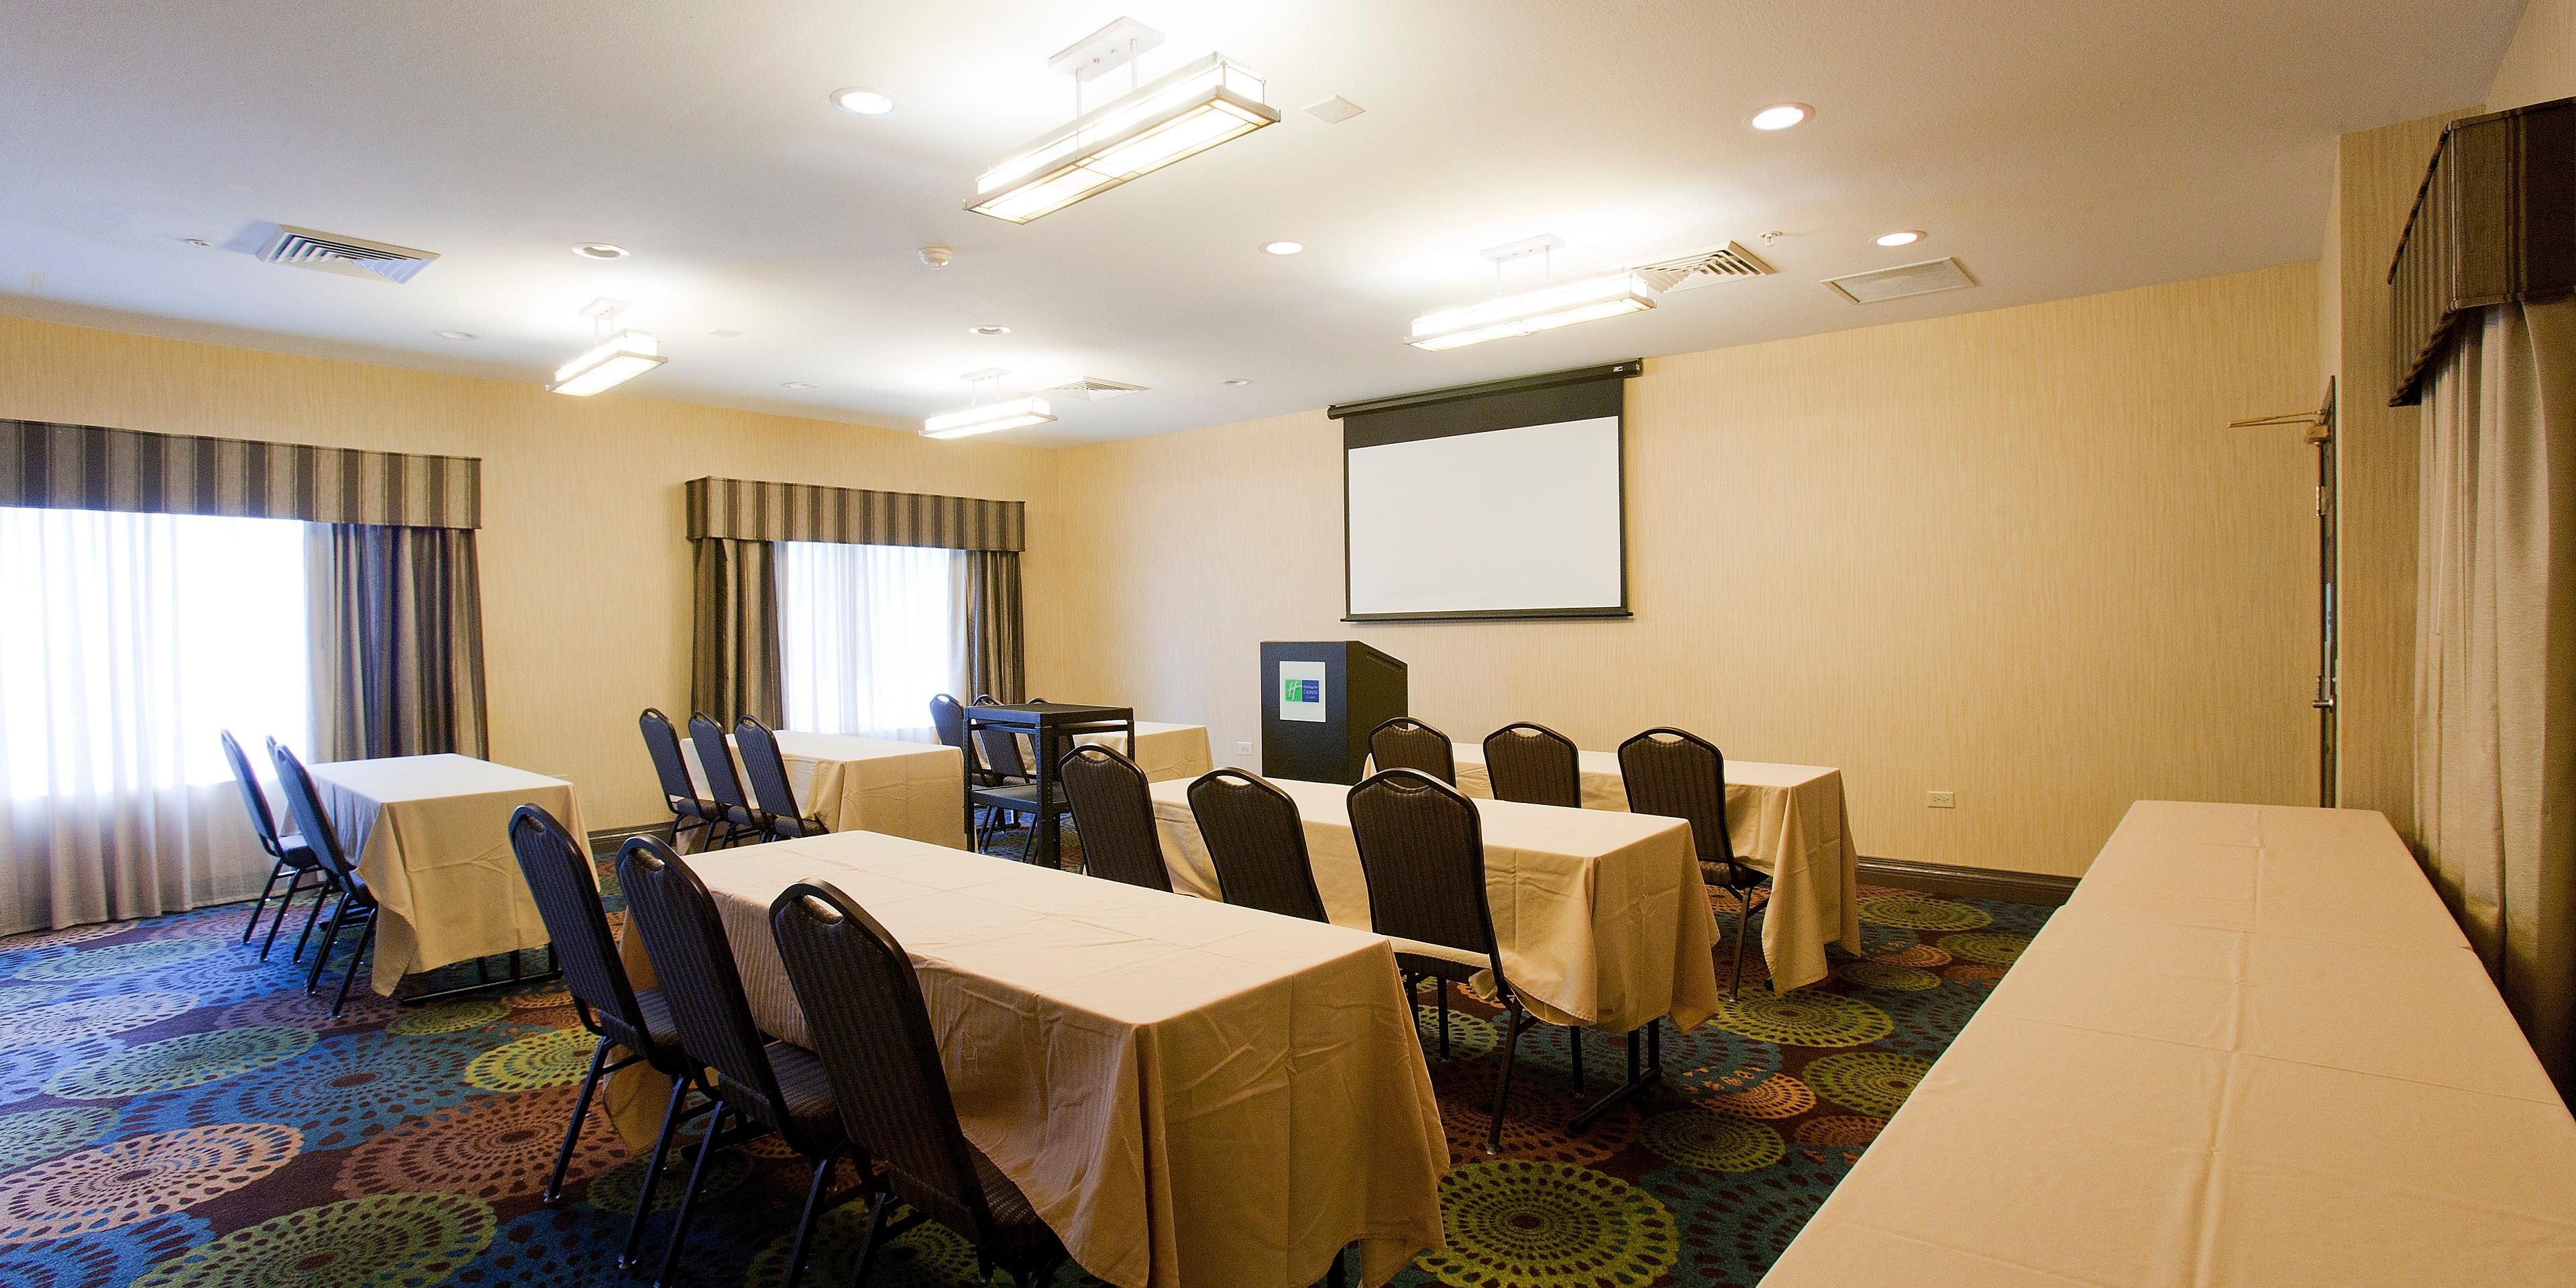 Let us help host your next gathering or corporate meeting. We offer 598 square feet of meeting space with catering options.